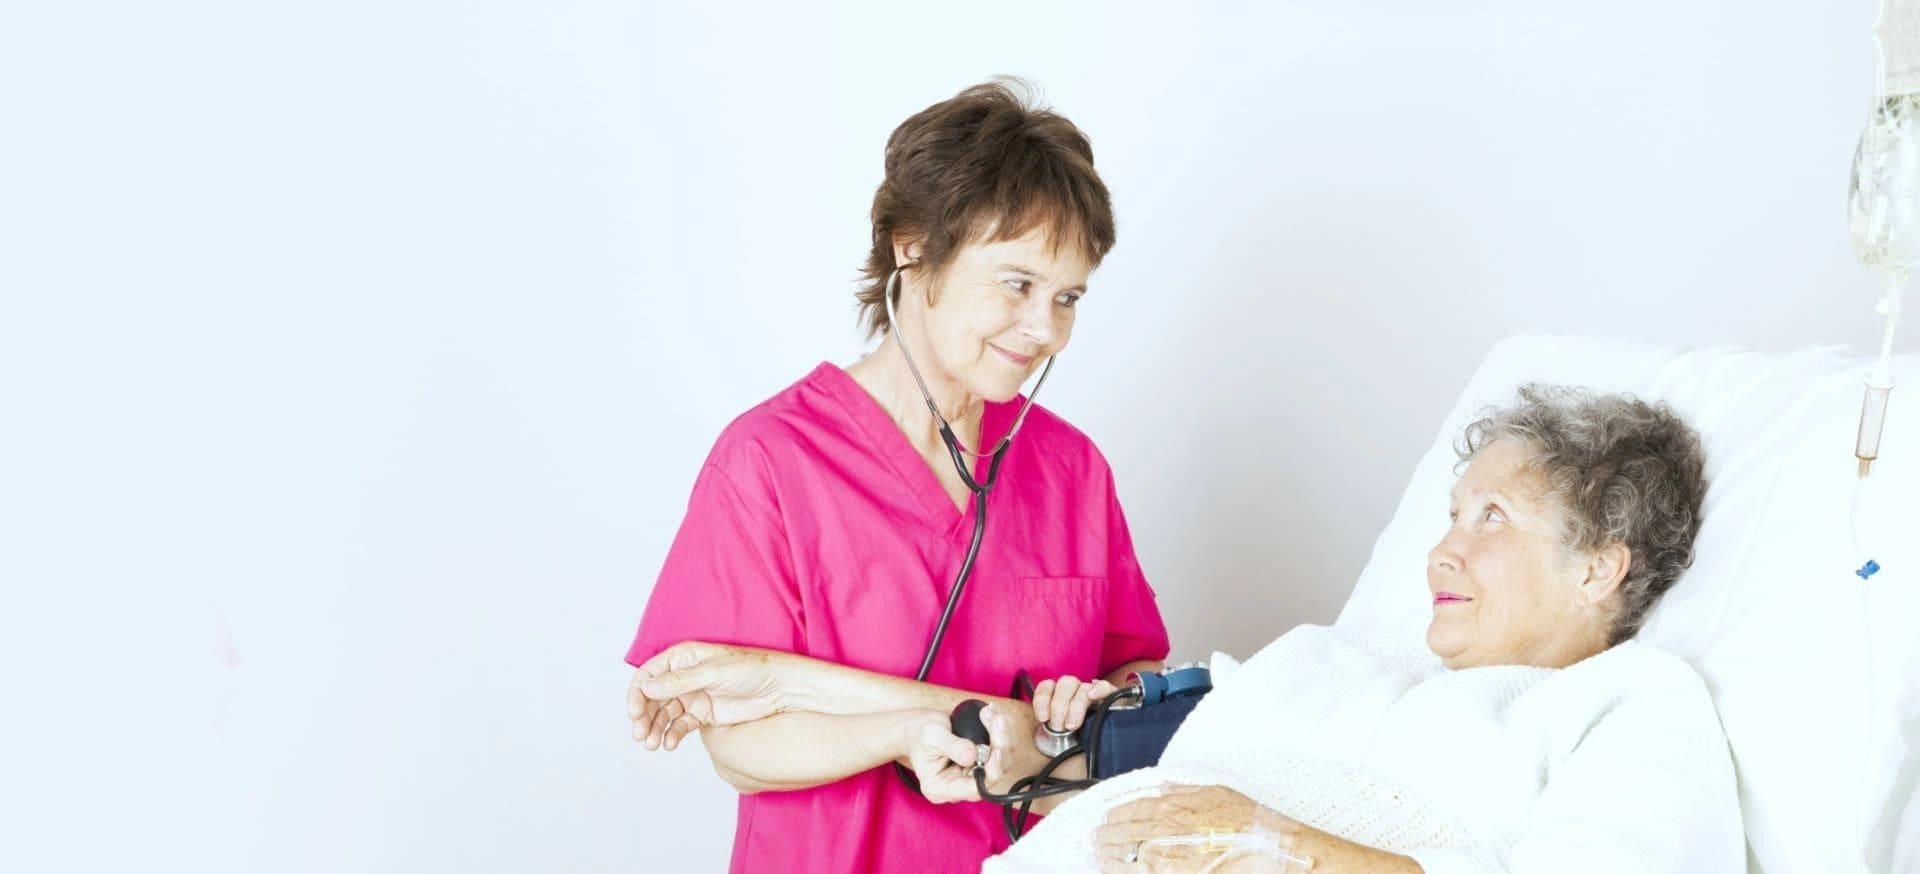 A woman in pink scrubs is holding a pair of scissors.